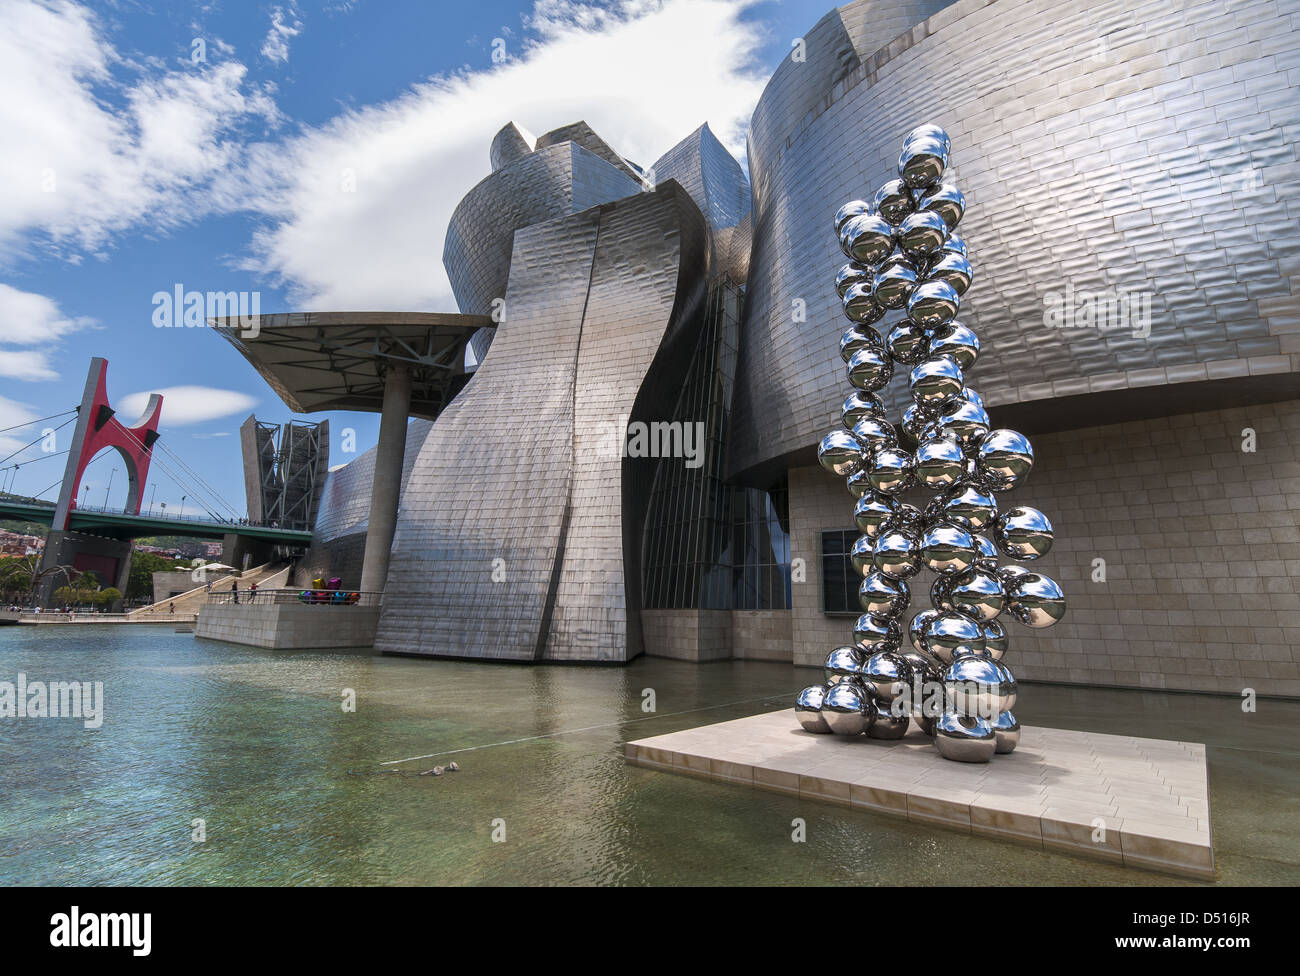 The Guggenheim Museum designed by Canadian-American architect Frank Gehry, and located in Bilbao, Basque Country, Spain Stock Photo